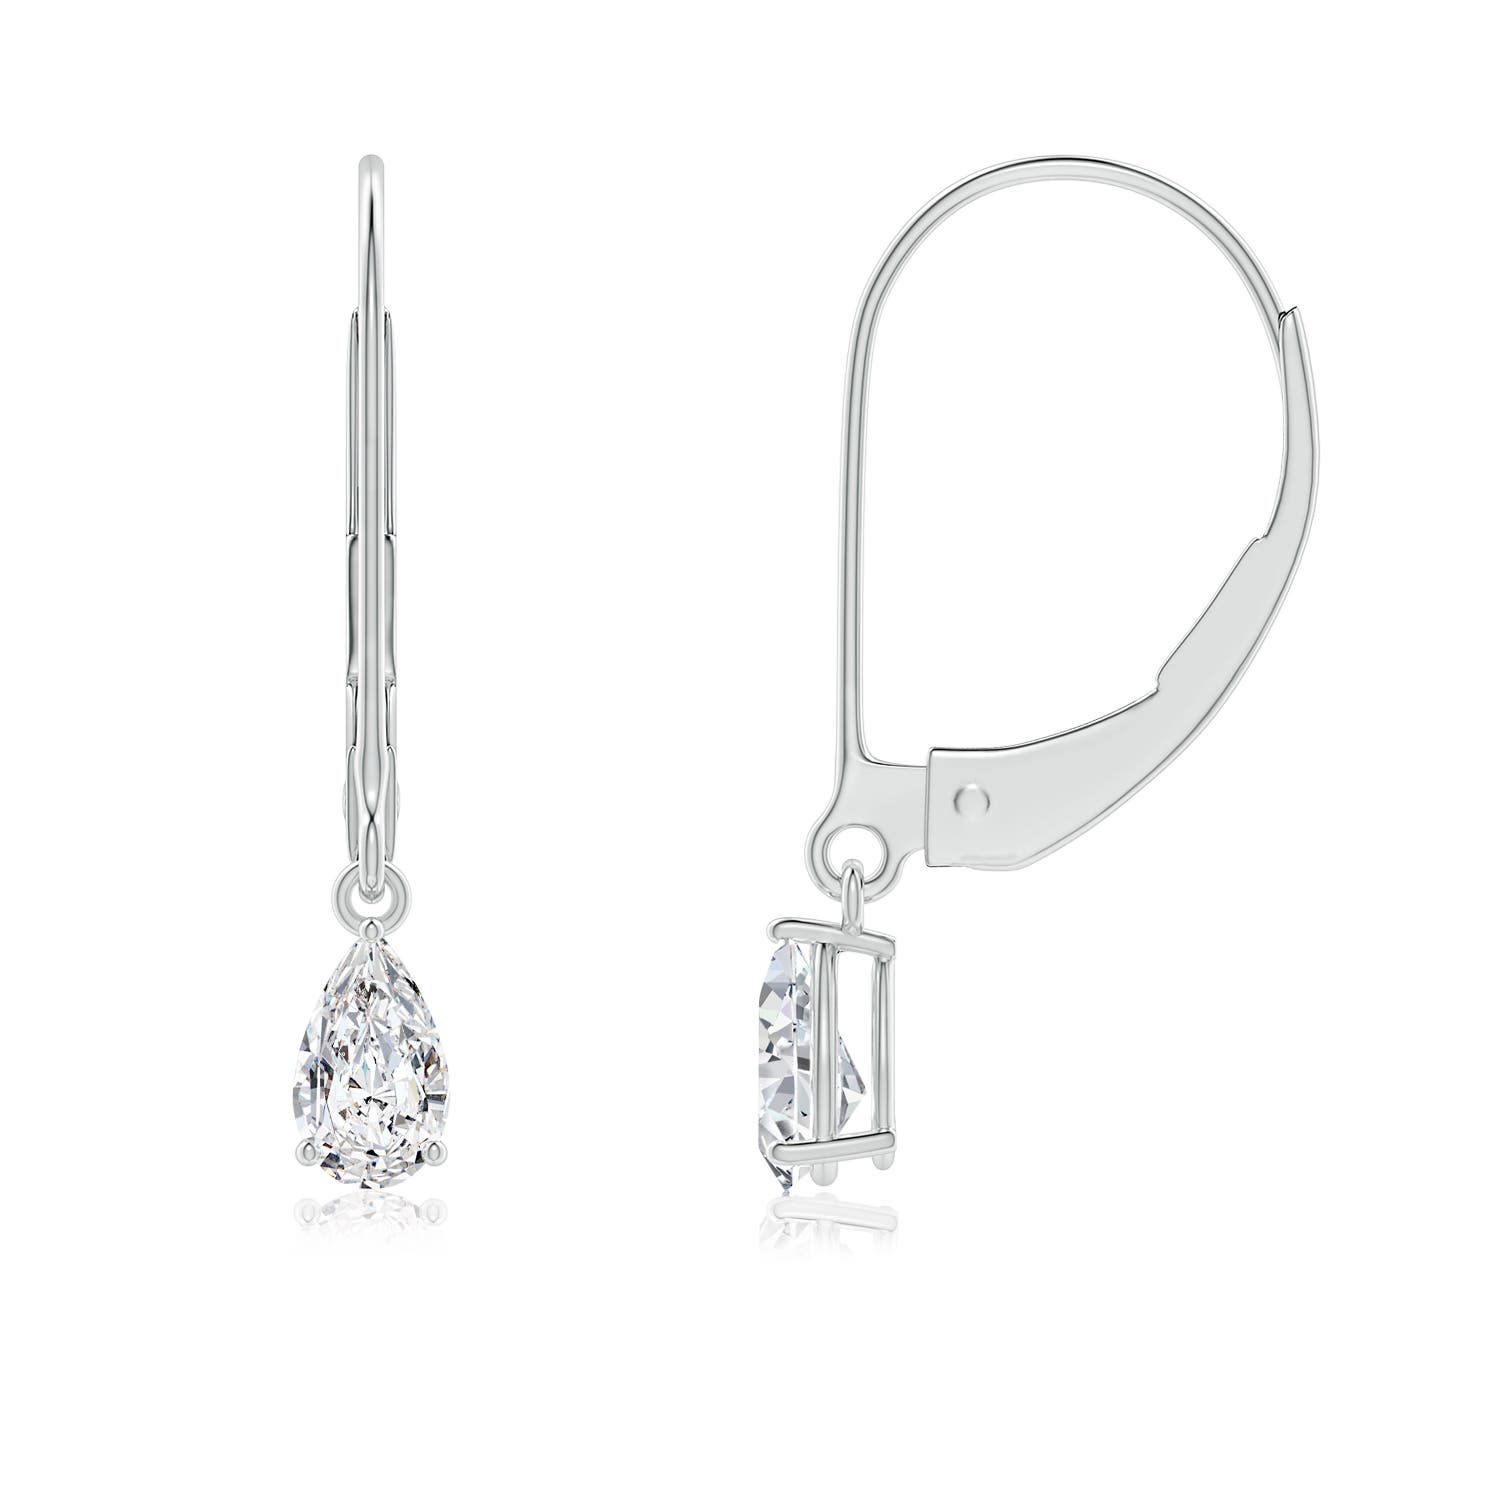 H, SI2 / 0.4 CT / 14 KT White Gold